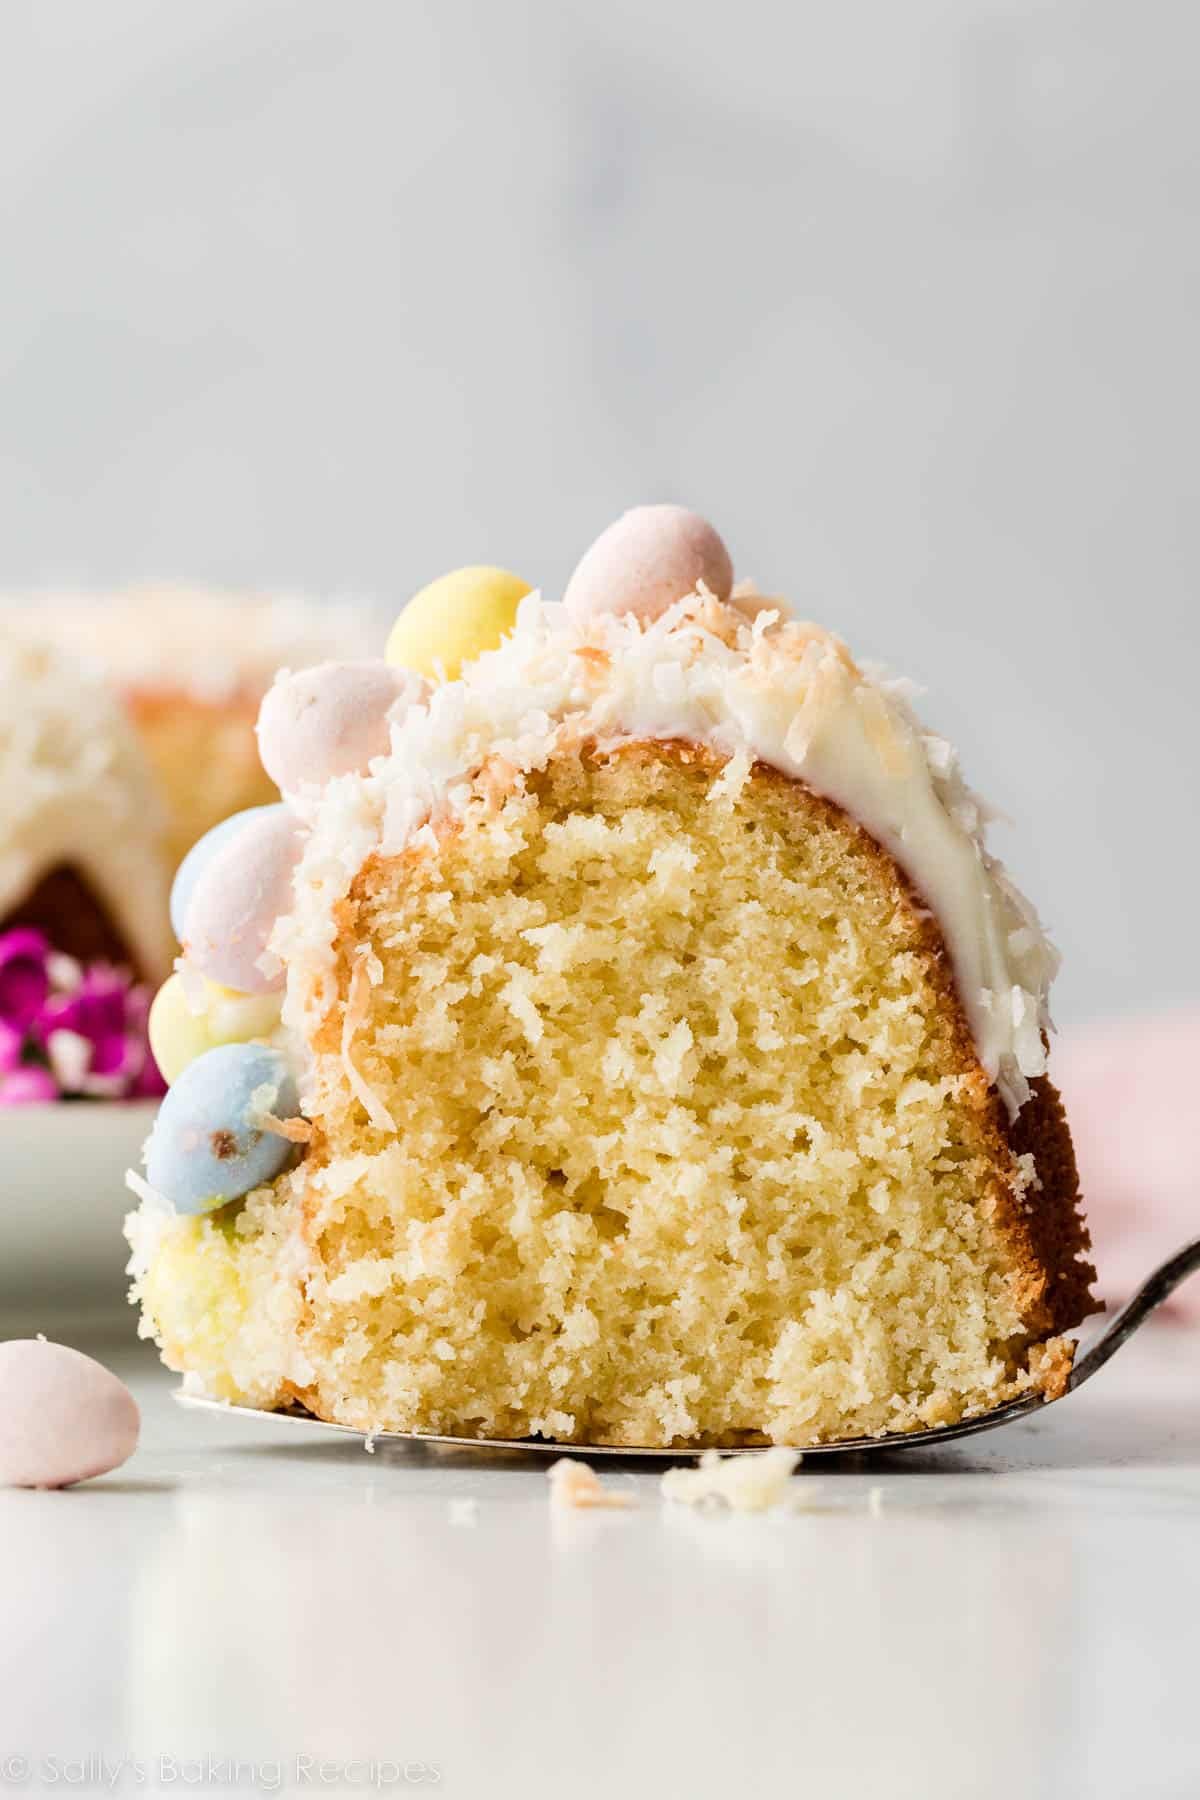 slice of coconut Bundt cake topped with cream cheese frosting and Easter chocolate egg candies.